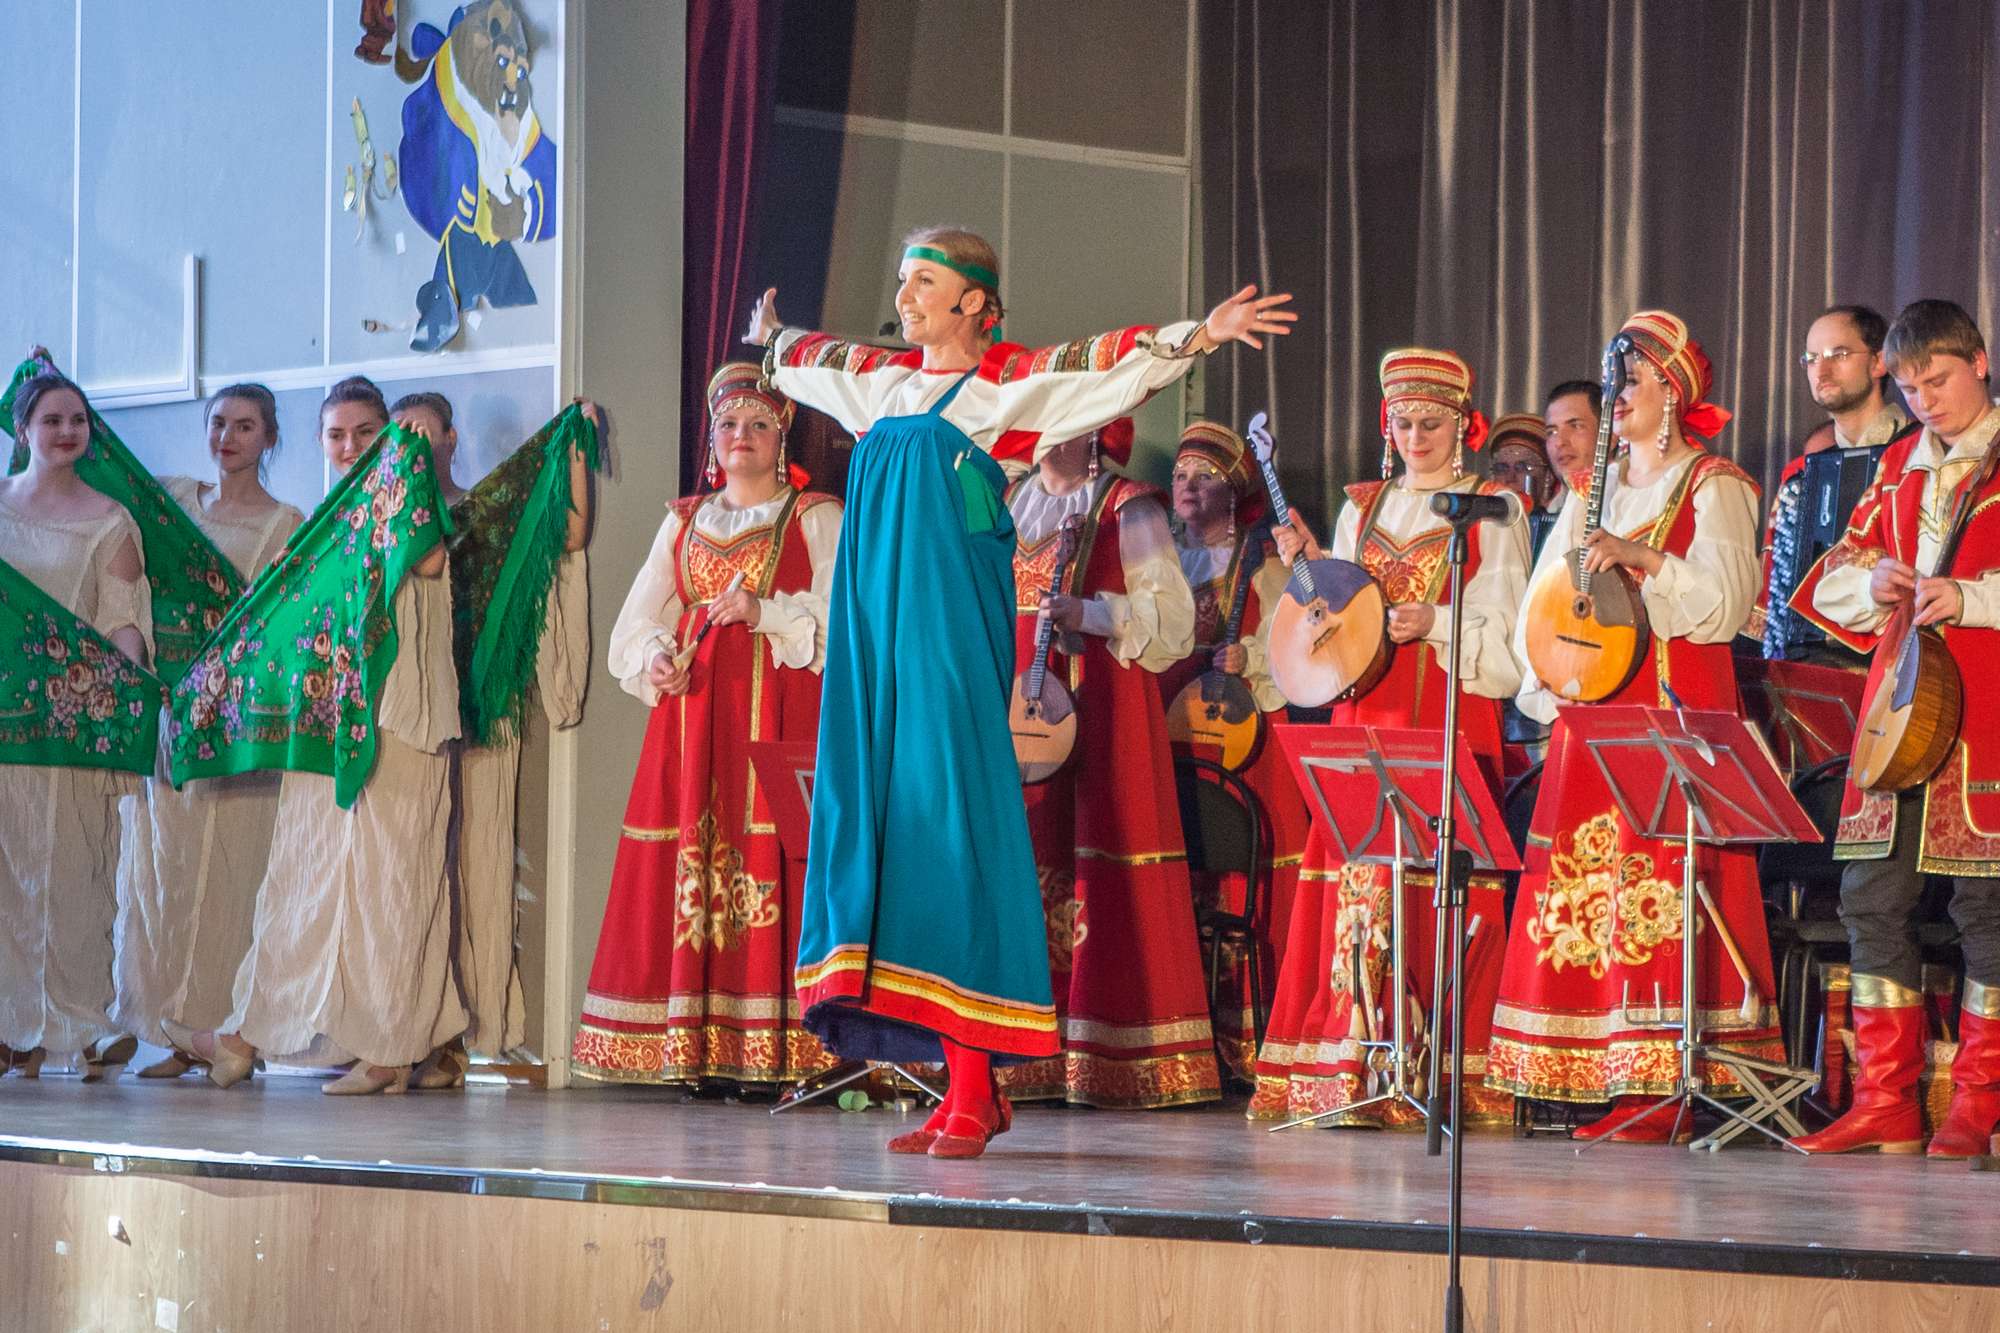 MRP and Orpheus theatre presented a premiere in Balashikha